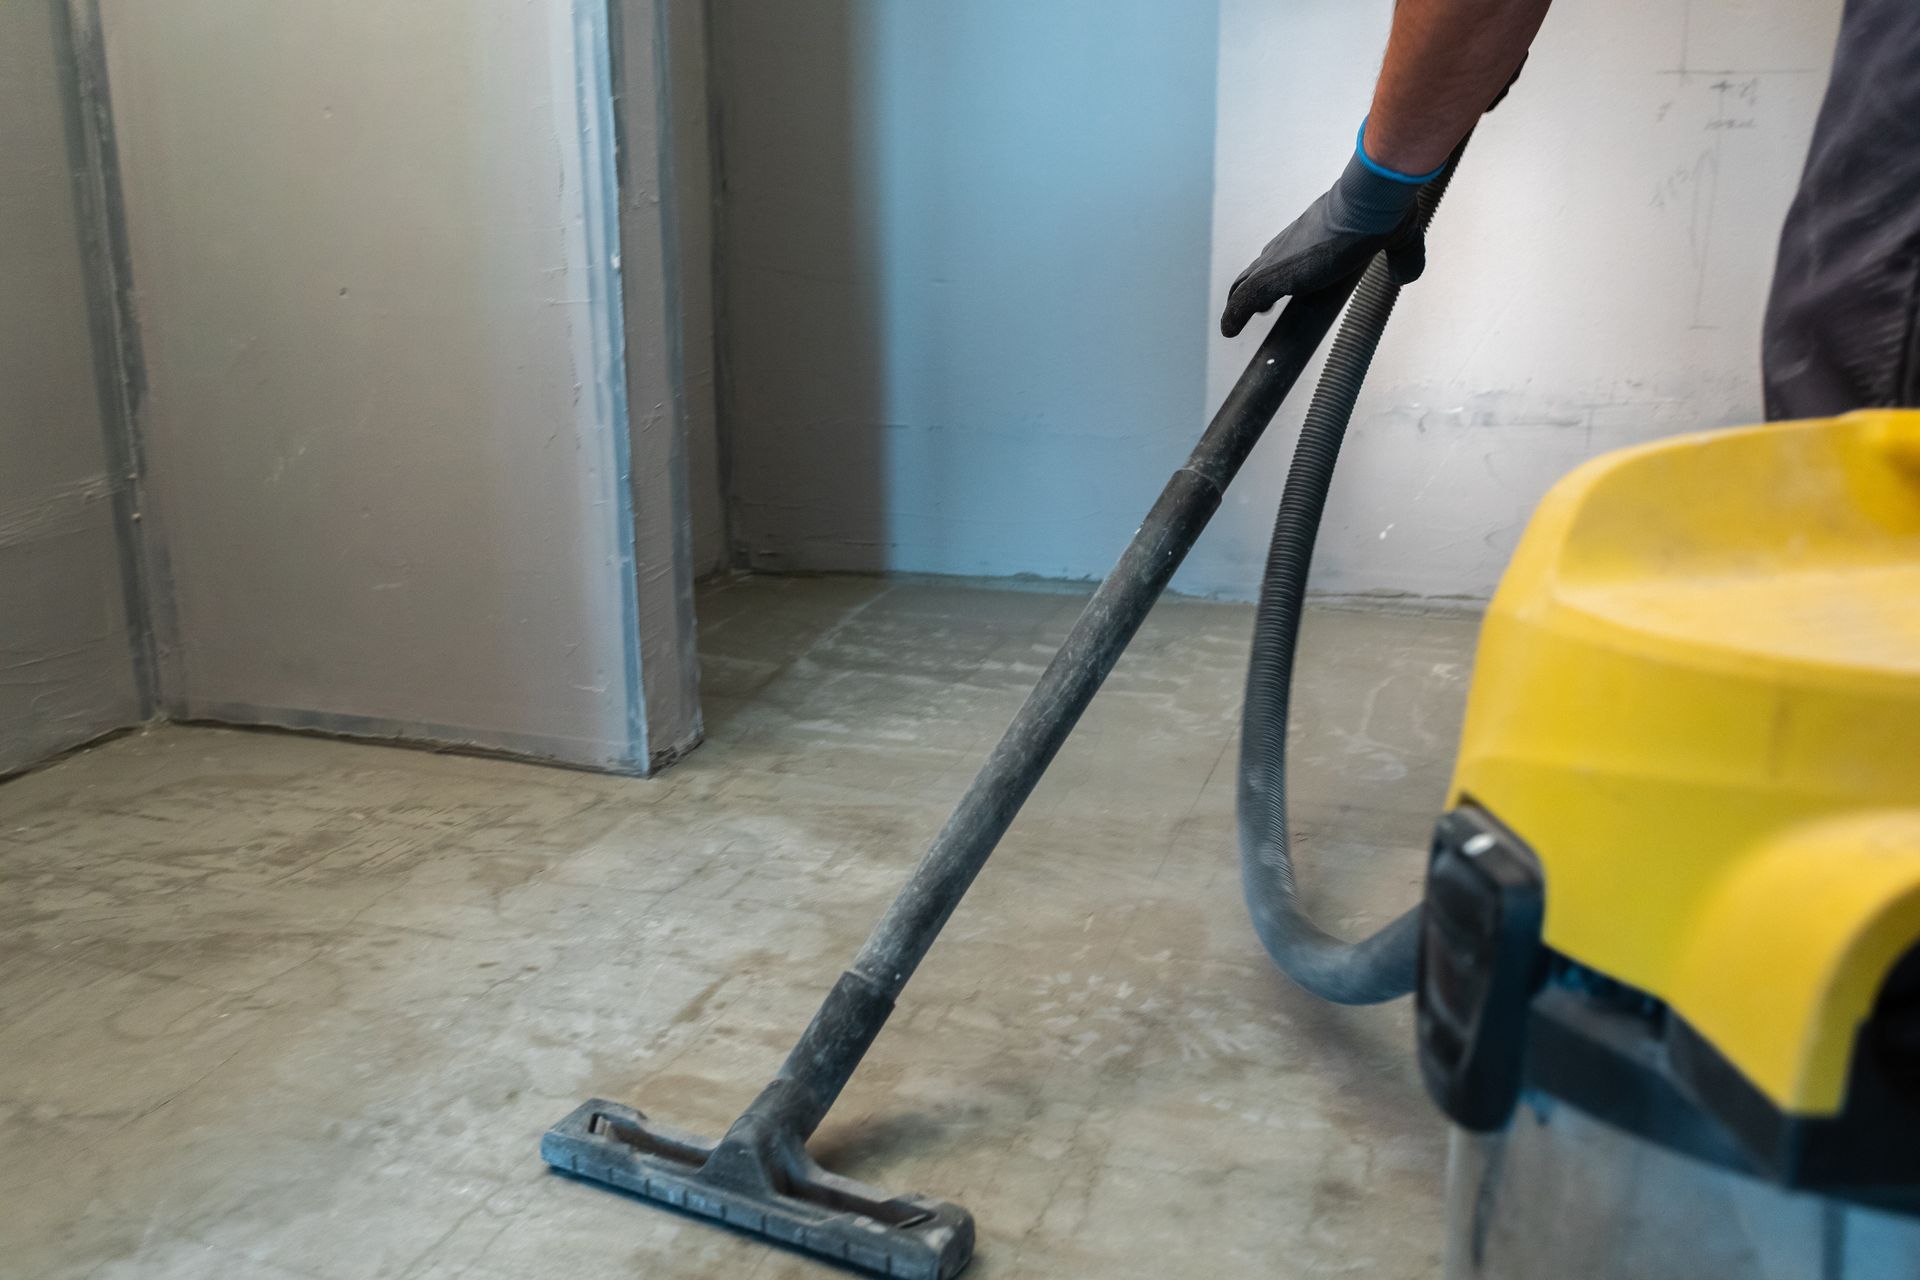 Someone using a wet/dry vacuum on the floor after a construction project.